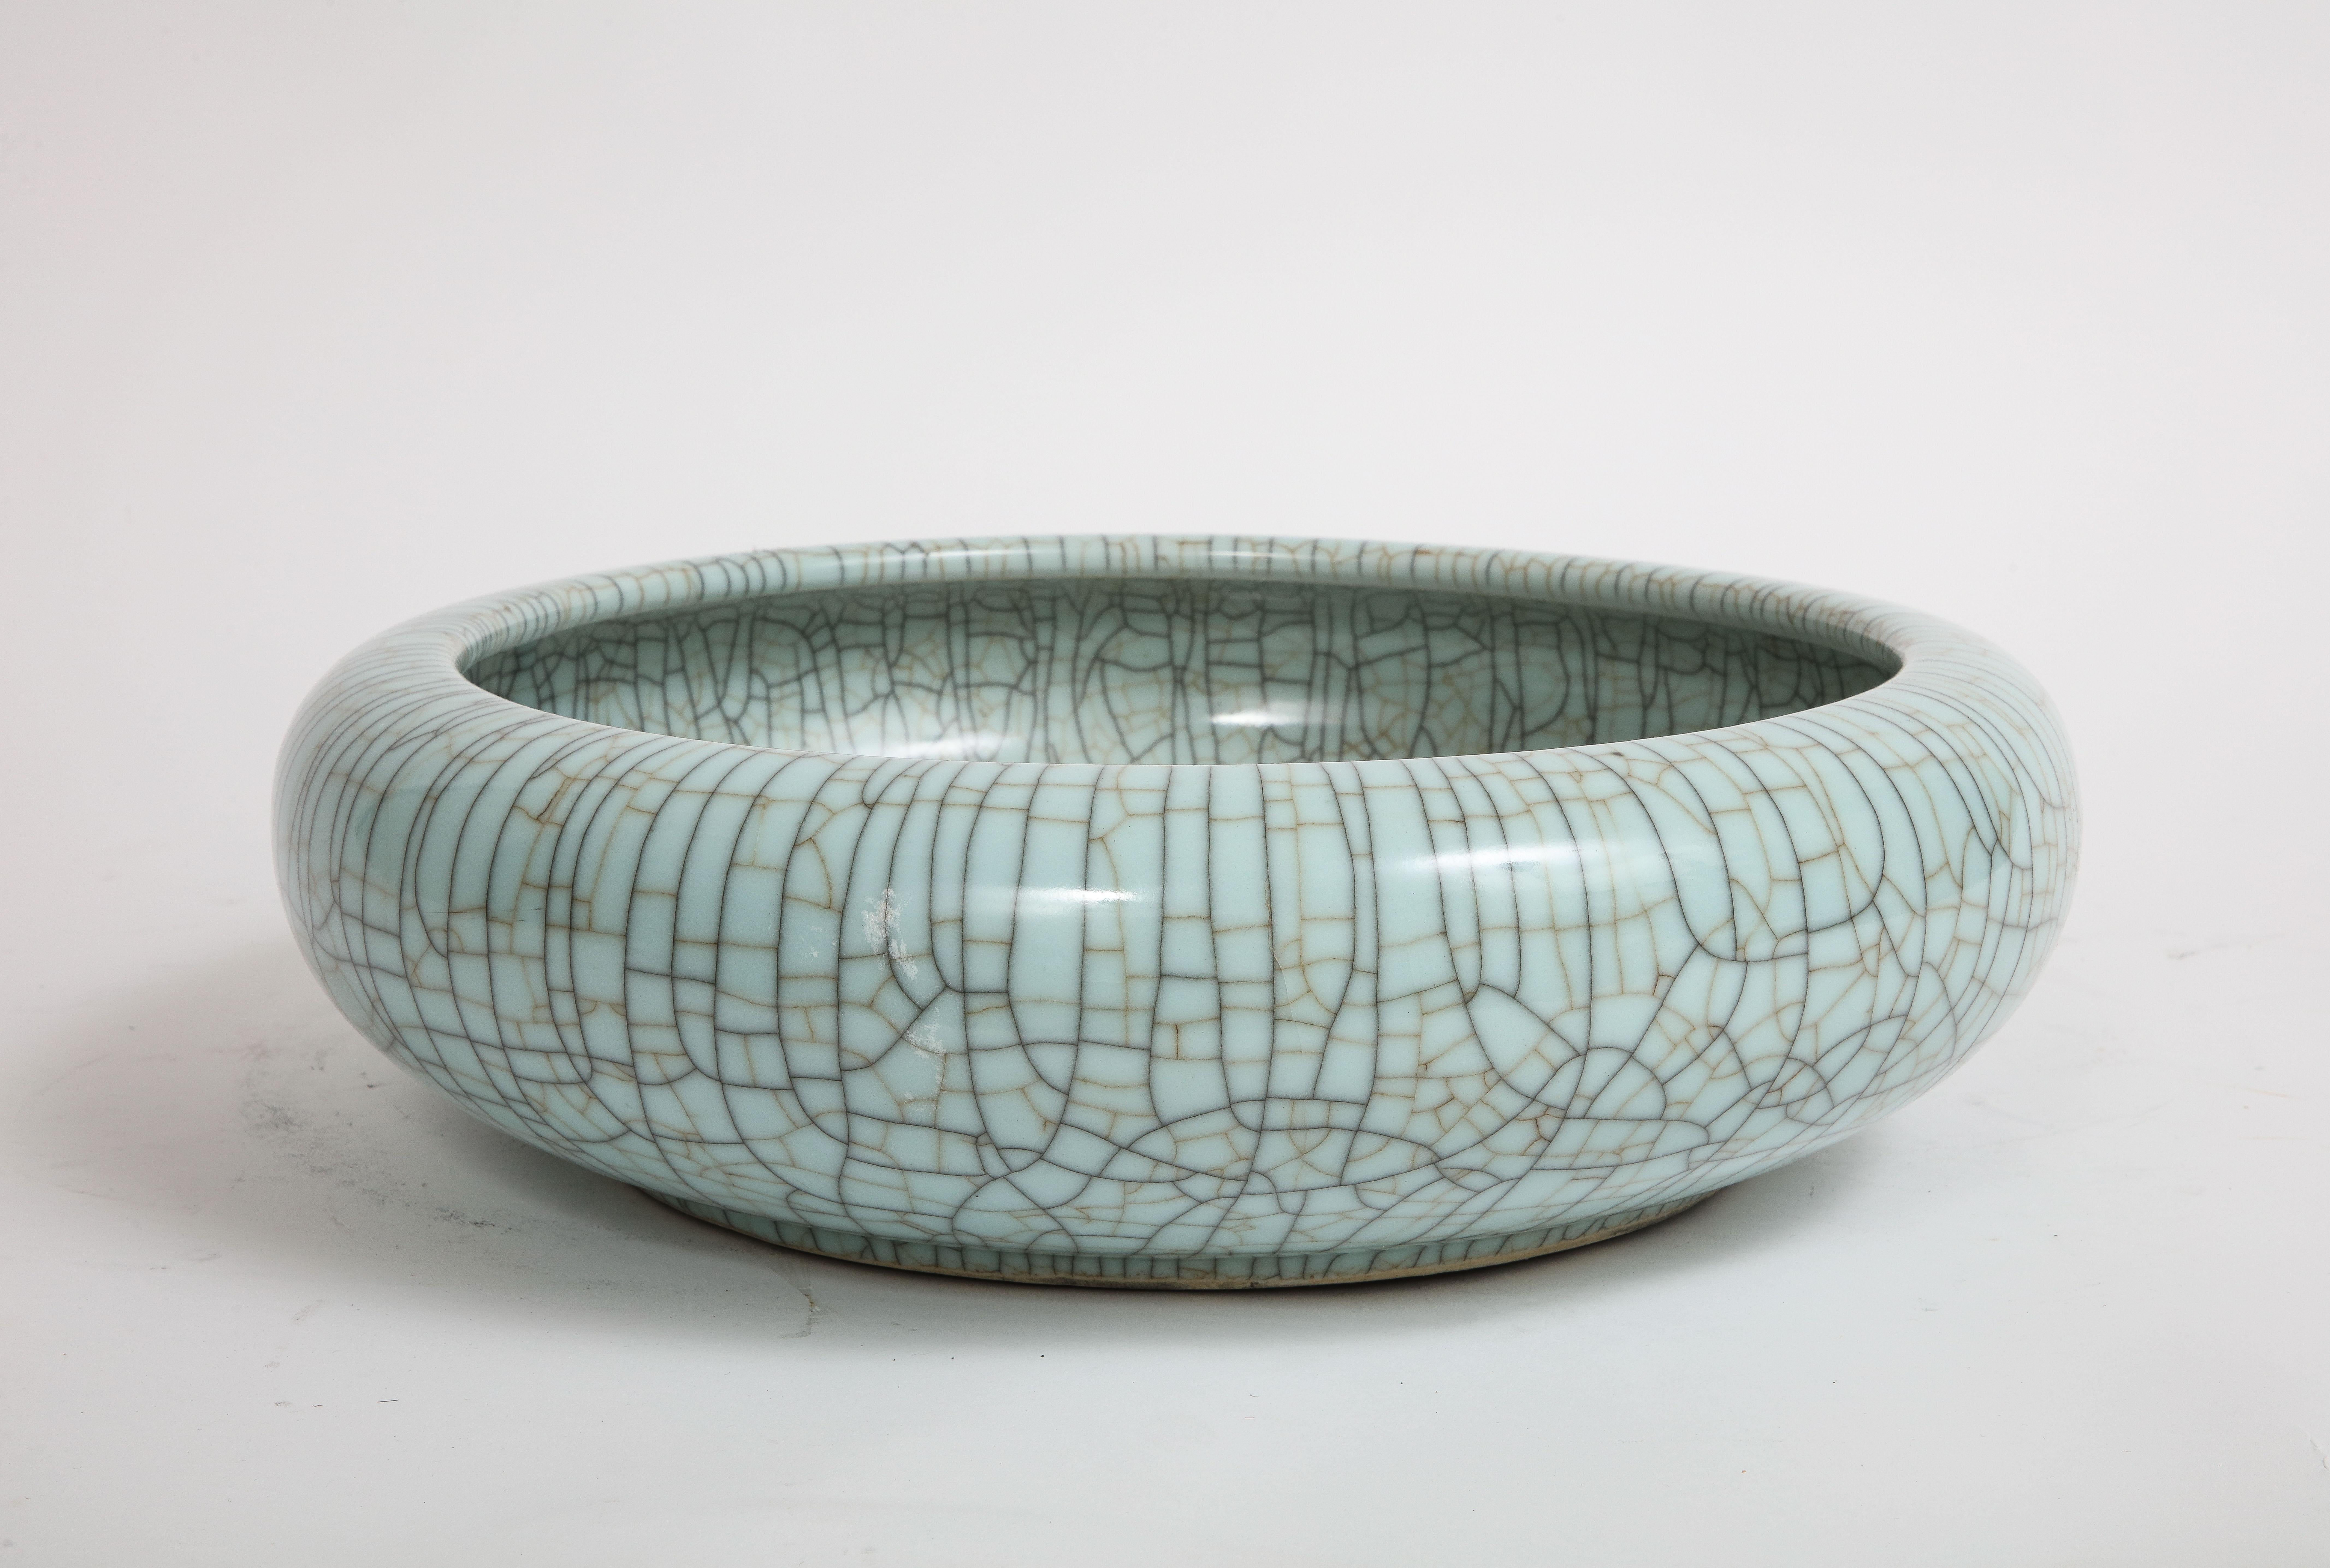 A Fabulous Chinese Celadon Crackle Porcelain Bowl/Centerpiece. This celadon glazed curved edge bowl, hails from the esteemed Qing Dynasty. This remarkable artifact boasts an impressive diameter of 16 inches and enthralls its viewer with its